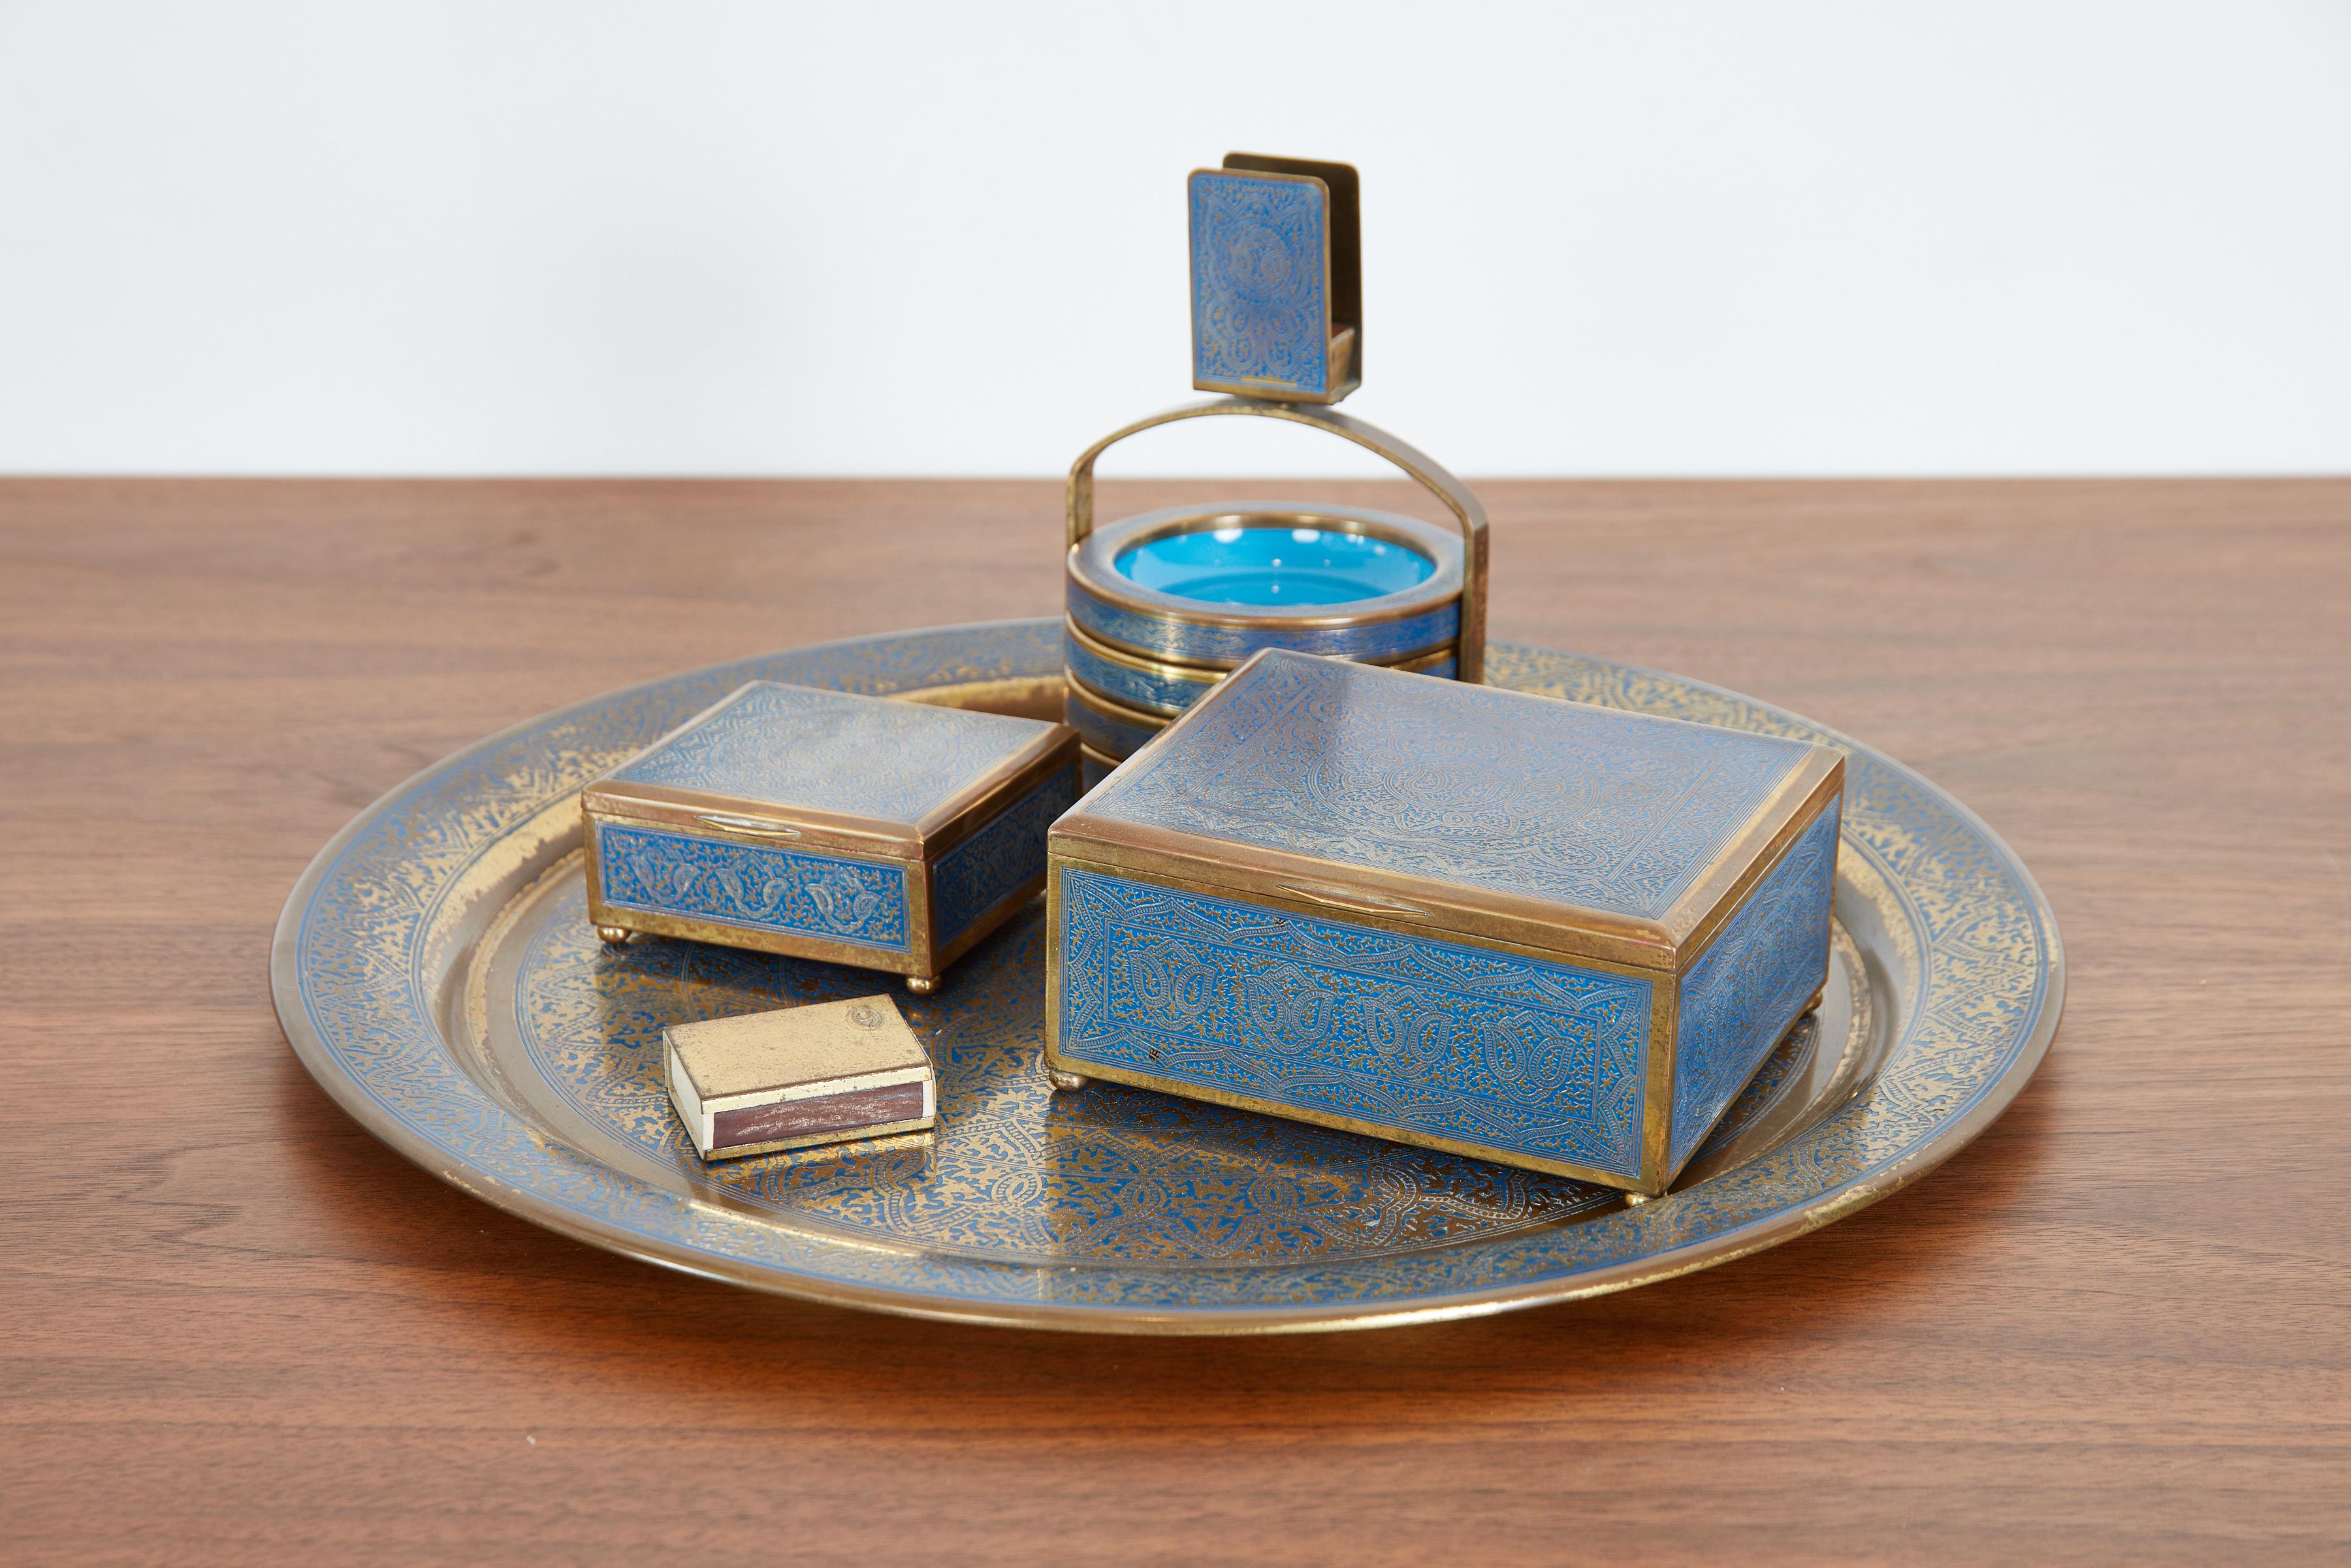 Incredible varnished brass Morrocan tea and smoking set. 
Marrakesh, 1970s 
Set consists of a gold and blue round tray, four colorful enameled coasters or ashtrays, with its object to carry them, a lighter, a cigar holder with matchbox, and a tea